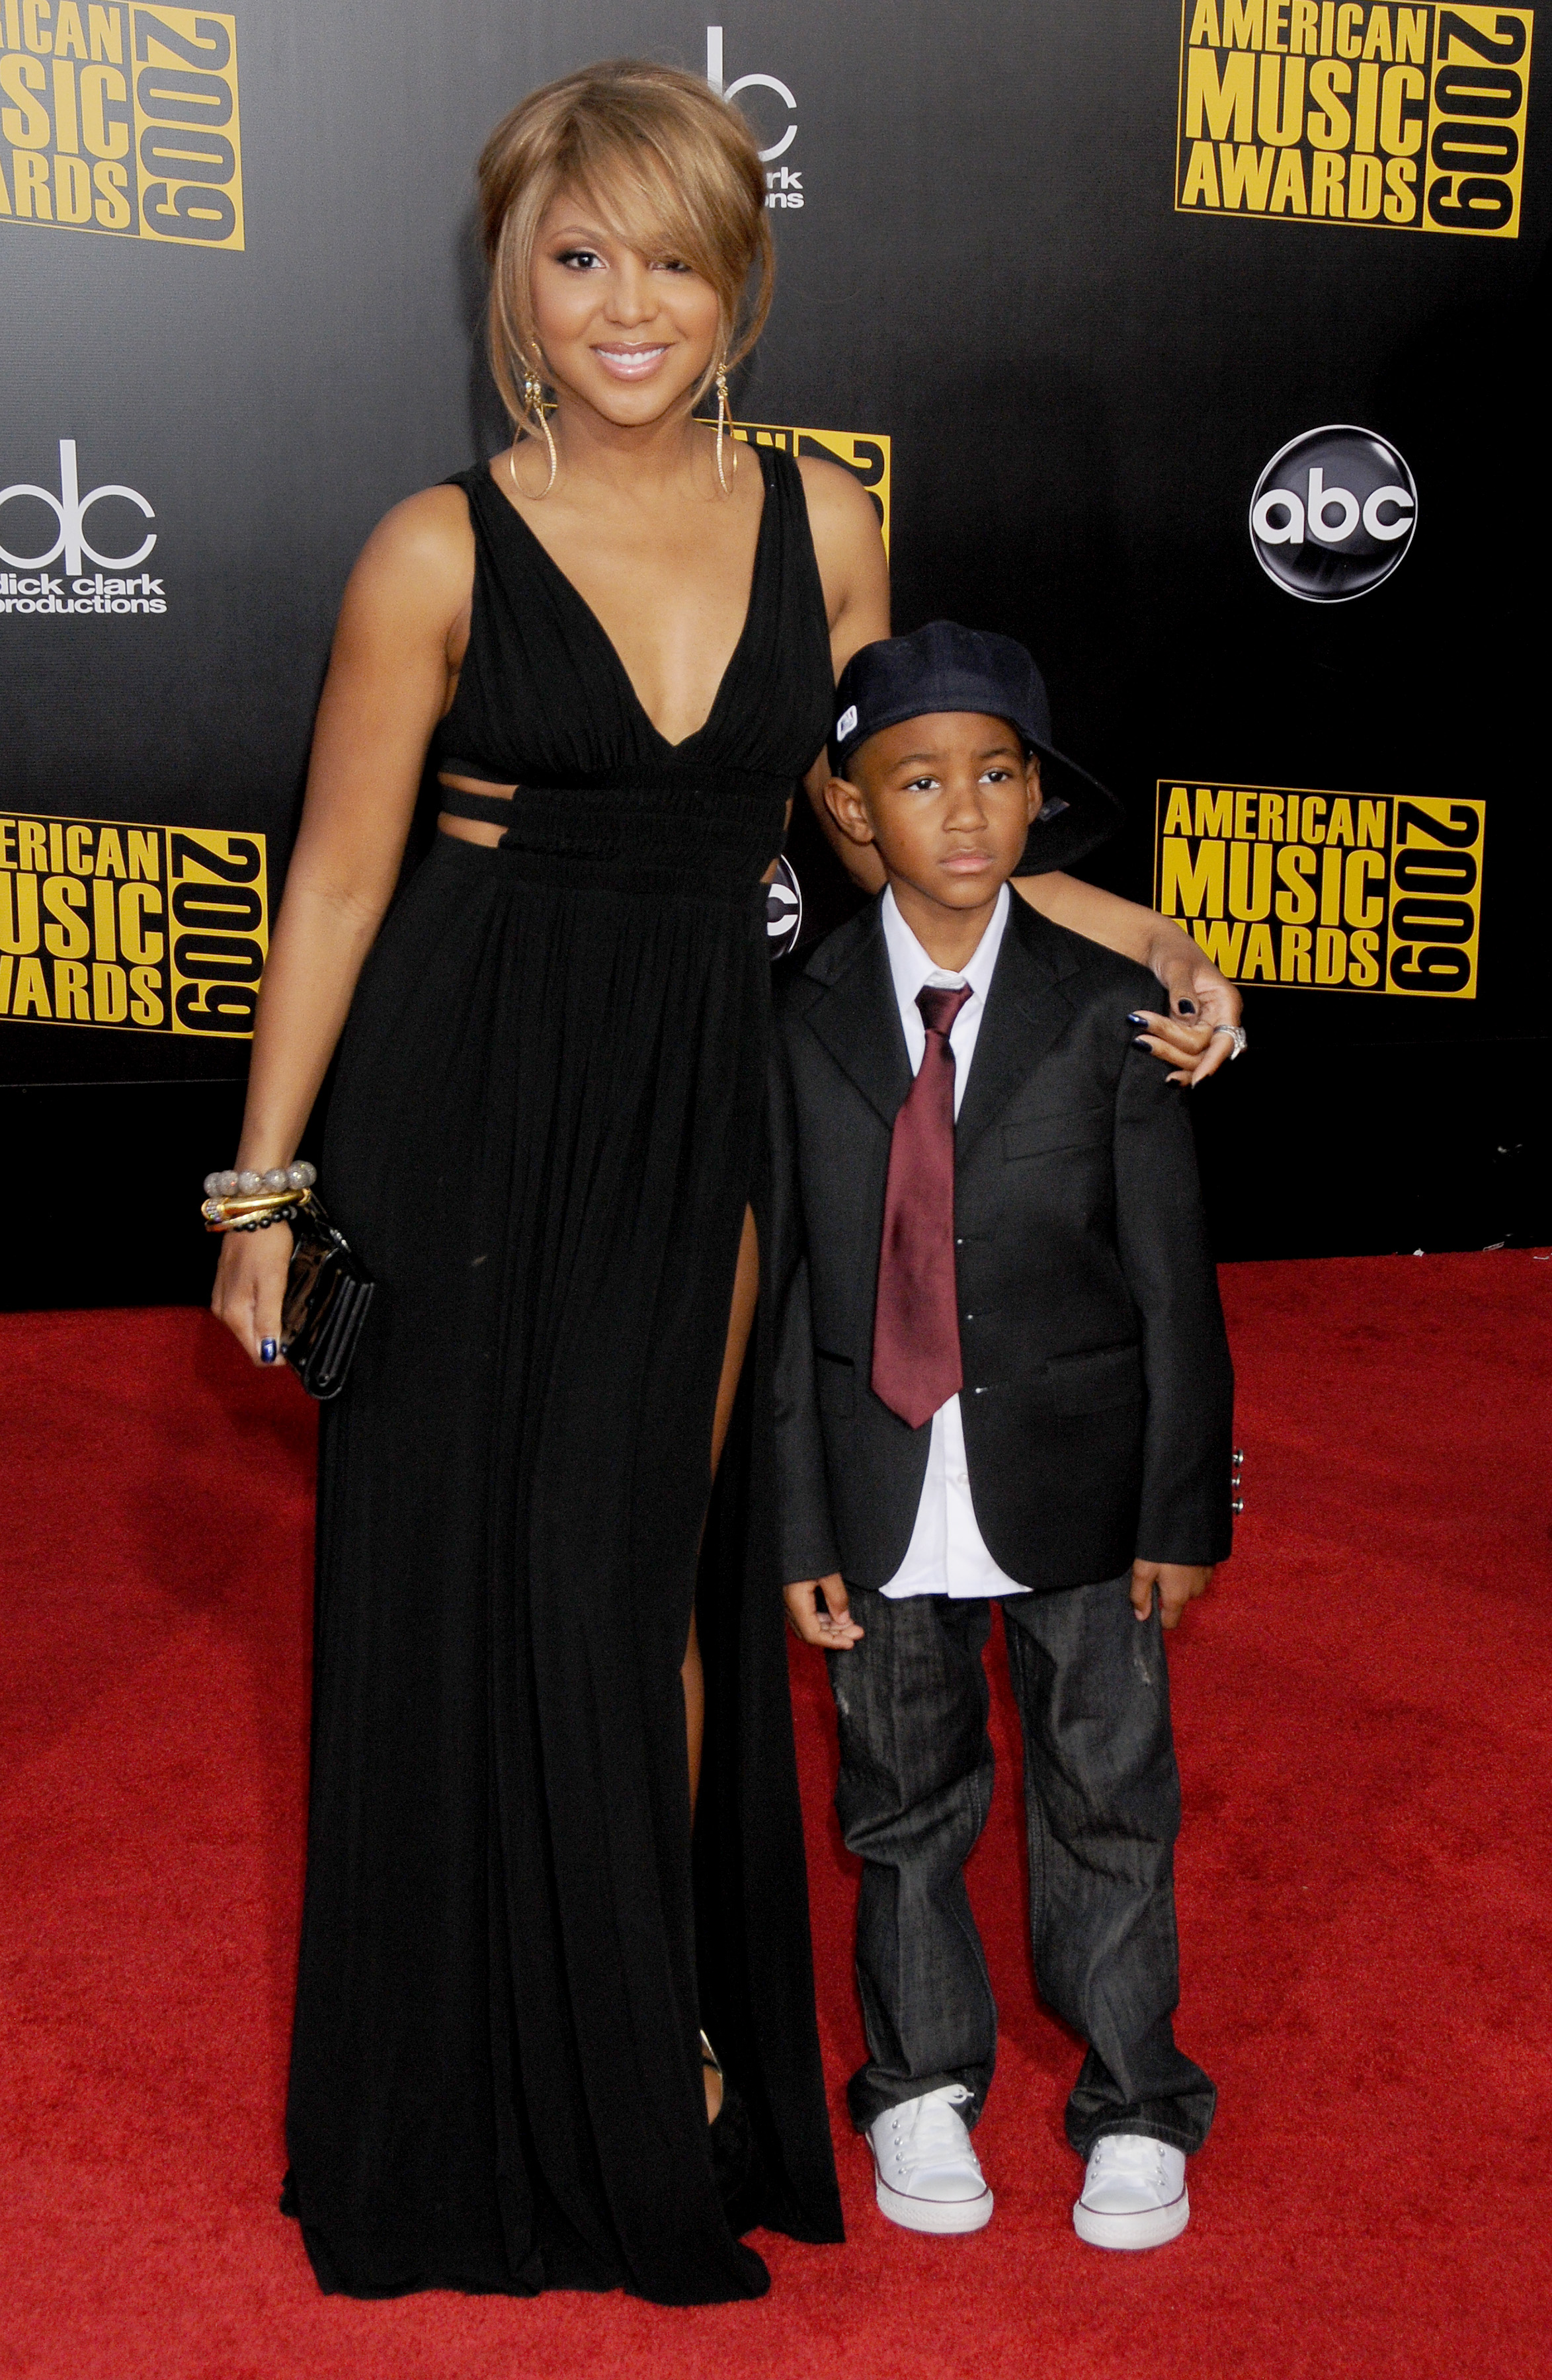 Toni Braxton and son Diezel arrive at "2009 American Music Awards" at the Nokia Theater L.A on November 22, 2009, in Los Angeles, California. | Source: Getty Images